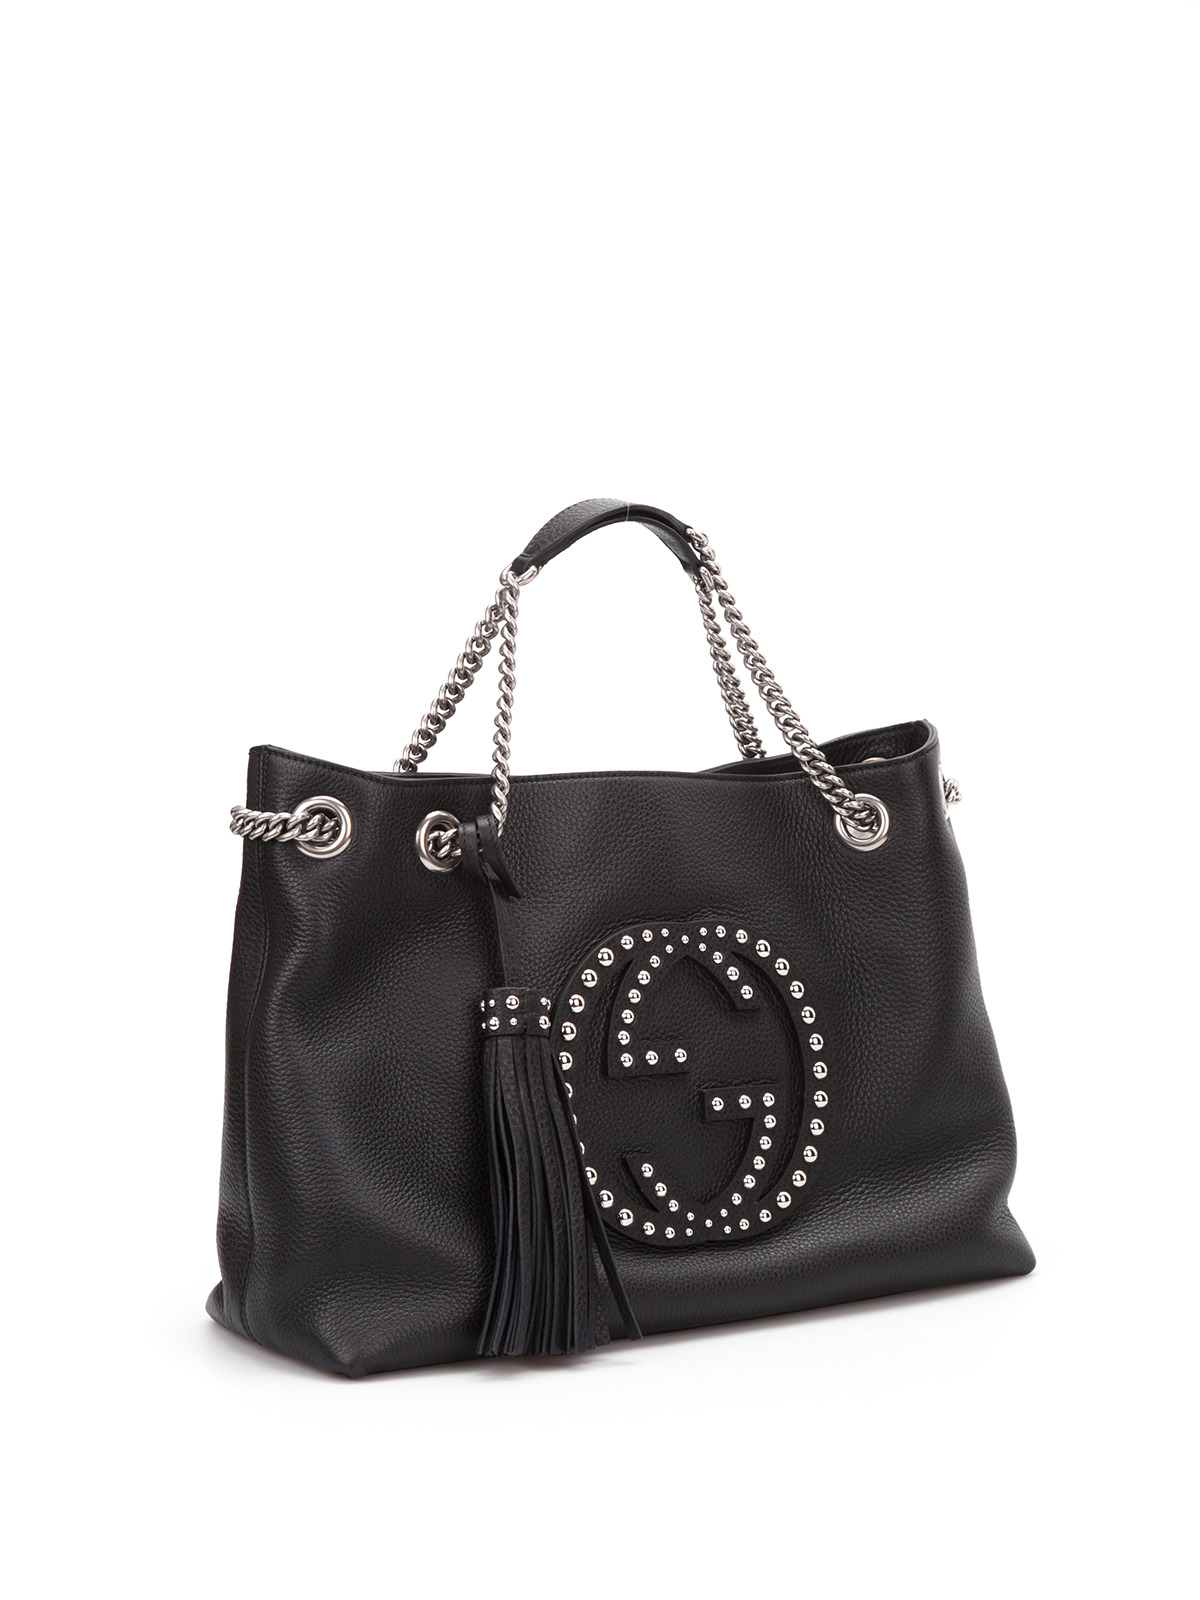 Soho studded leather shoulder bag by Gucci - totes bags | iKRIX